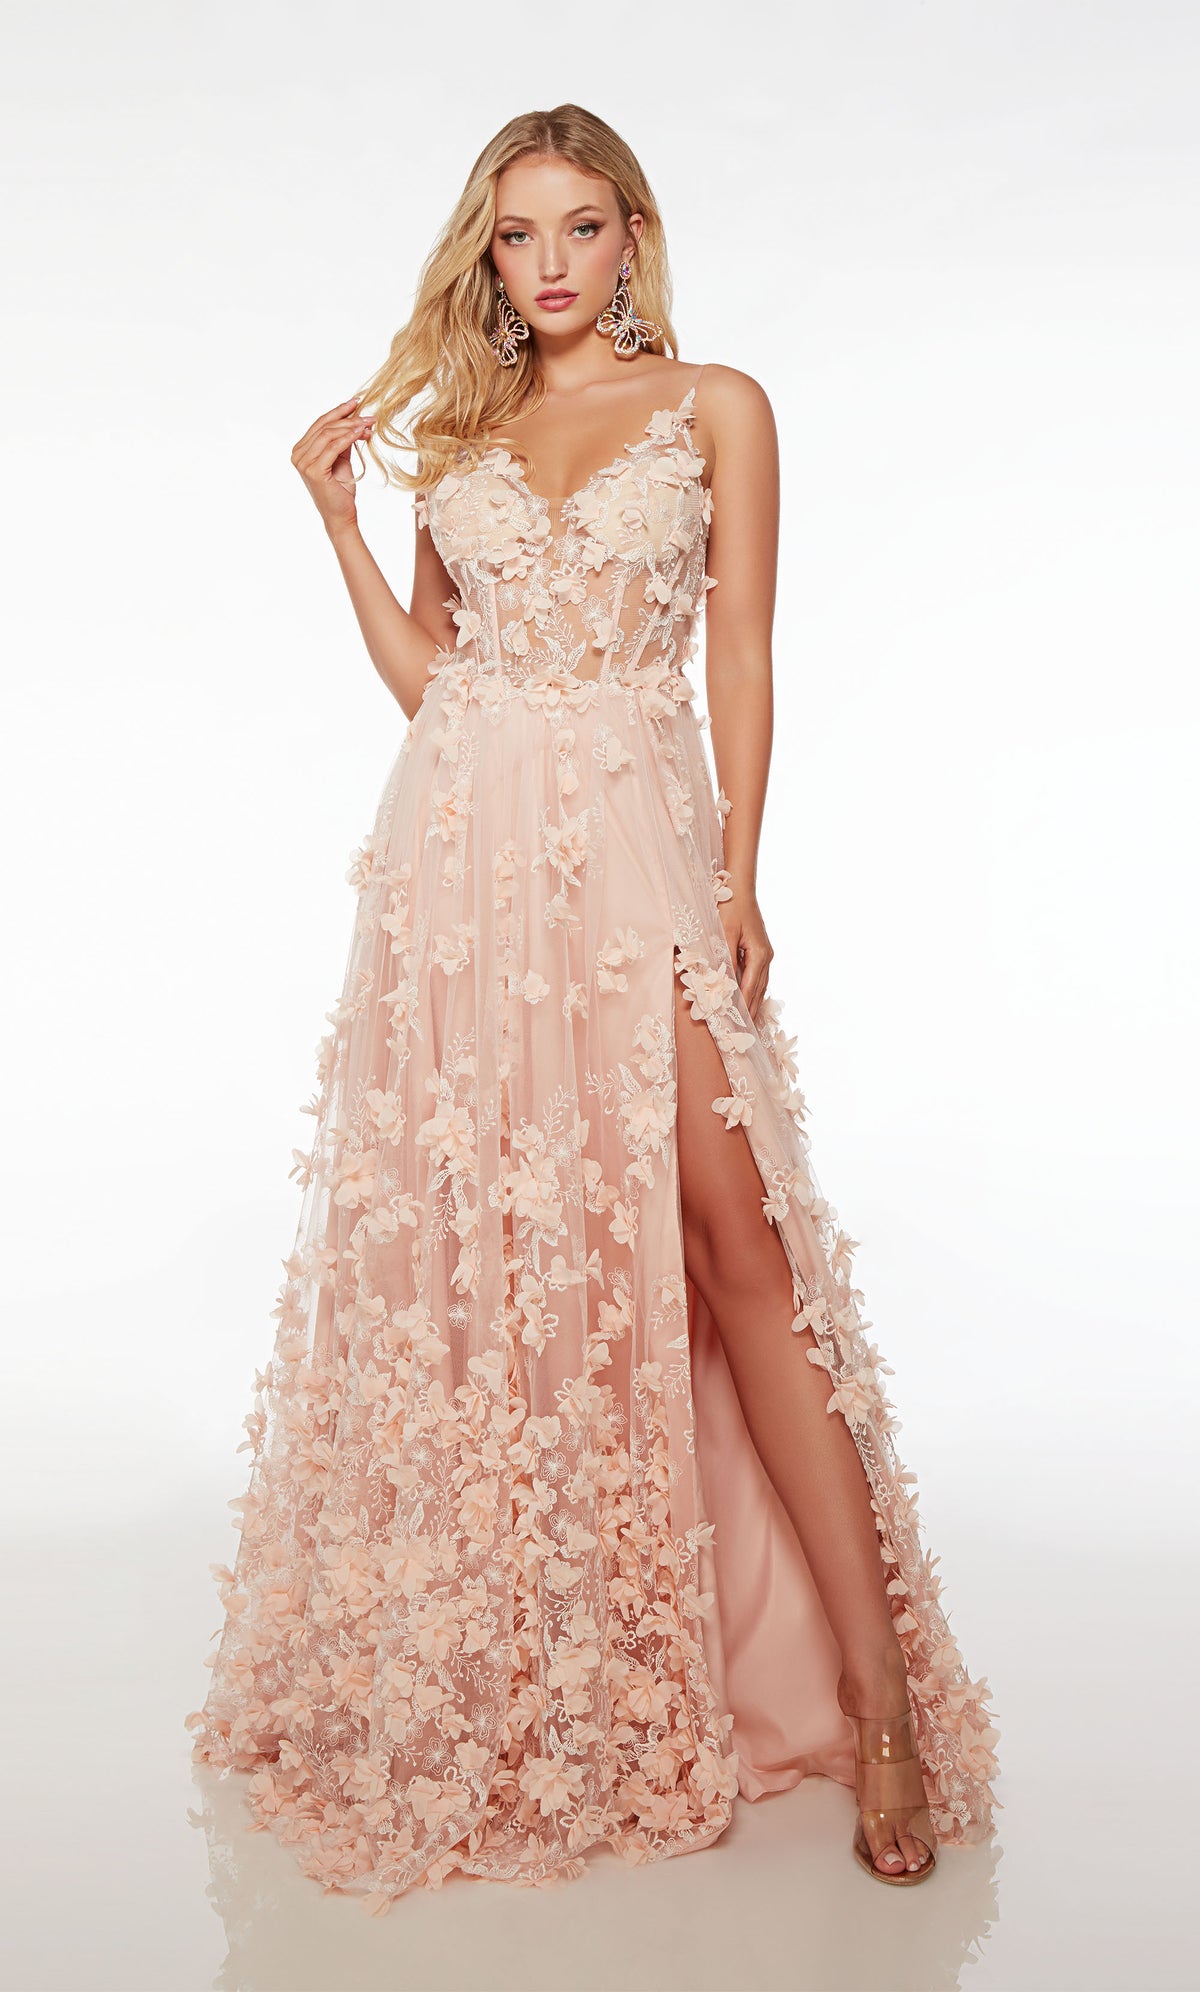 Soft pink 3D floral prom dress: V-neck, spaghetti straps, sheer corset, side slit, V back, and slight train for an charming and stylish look.